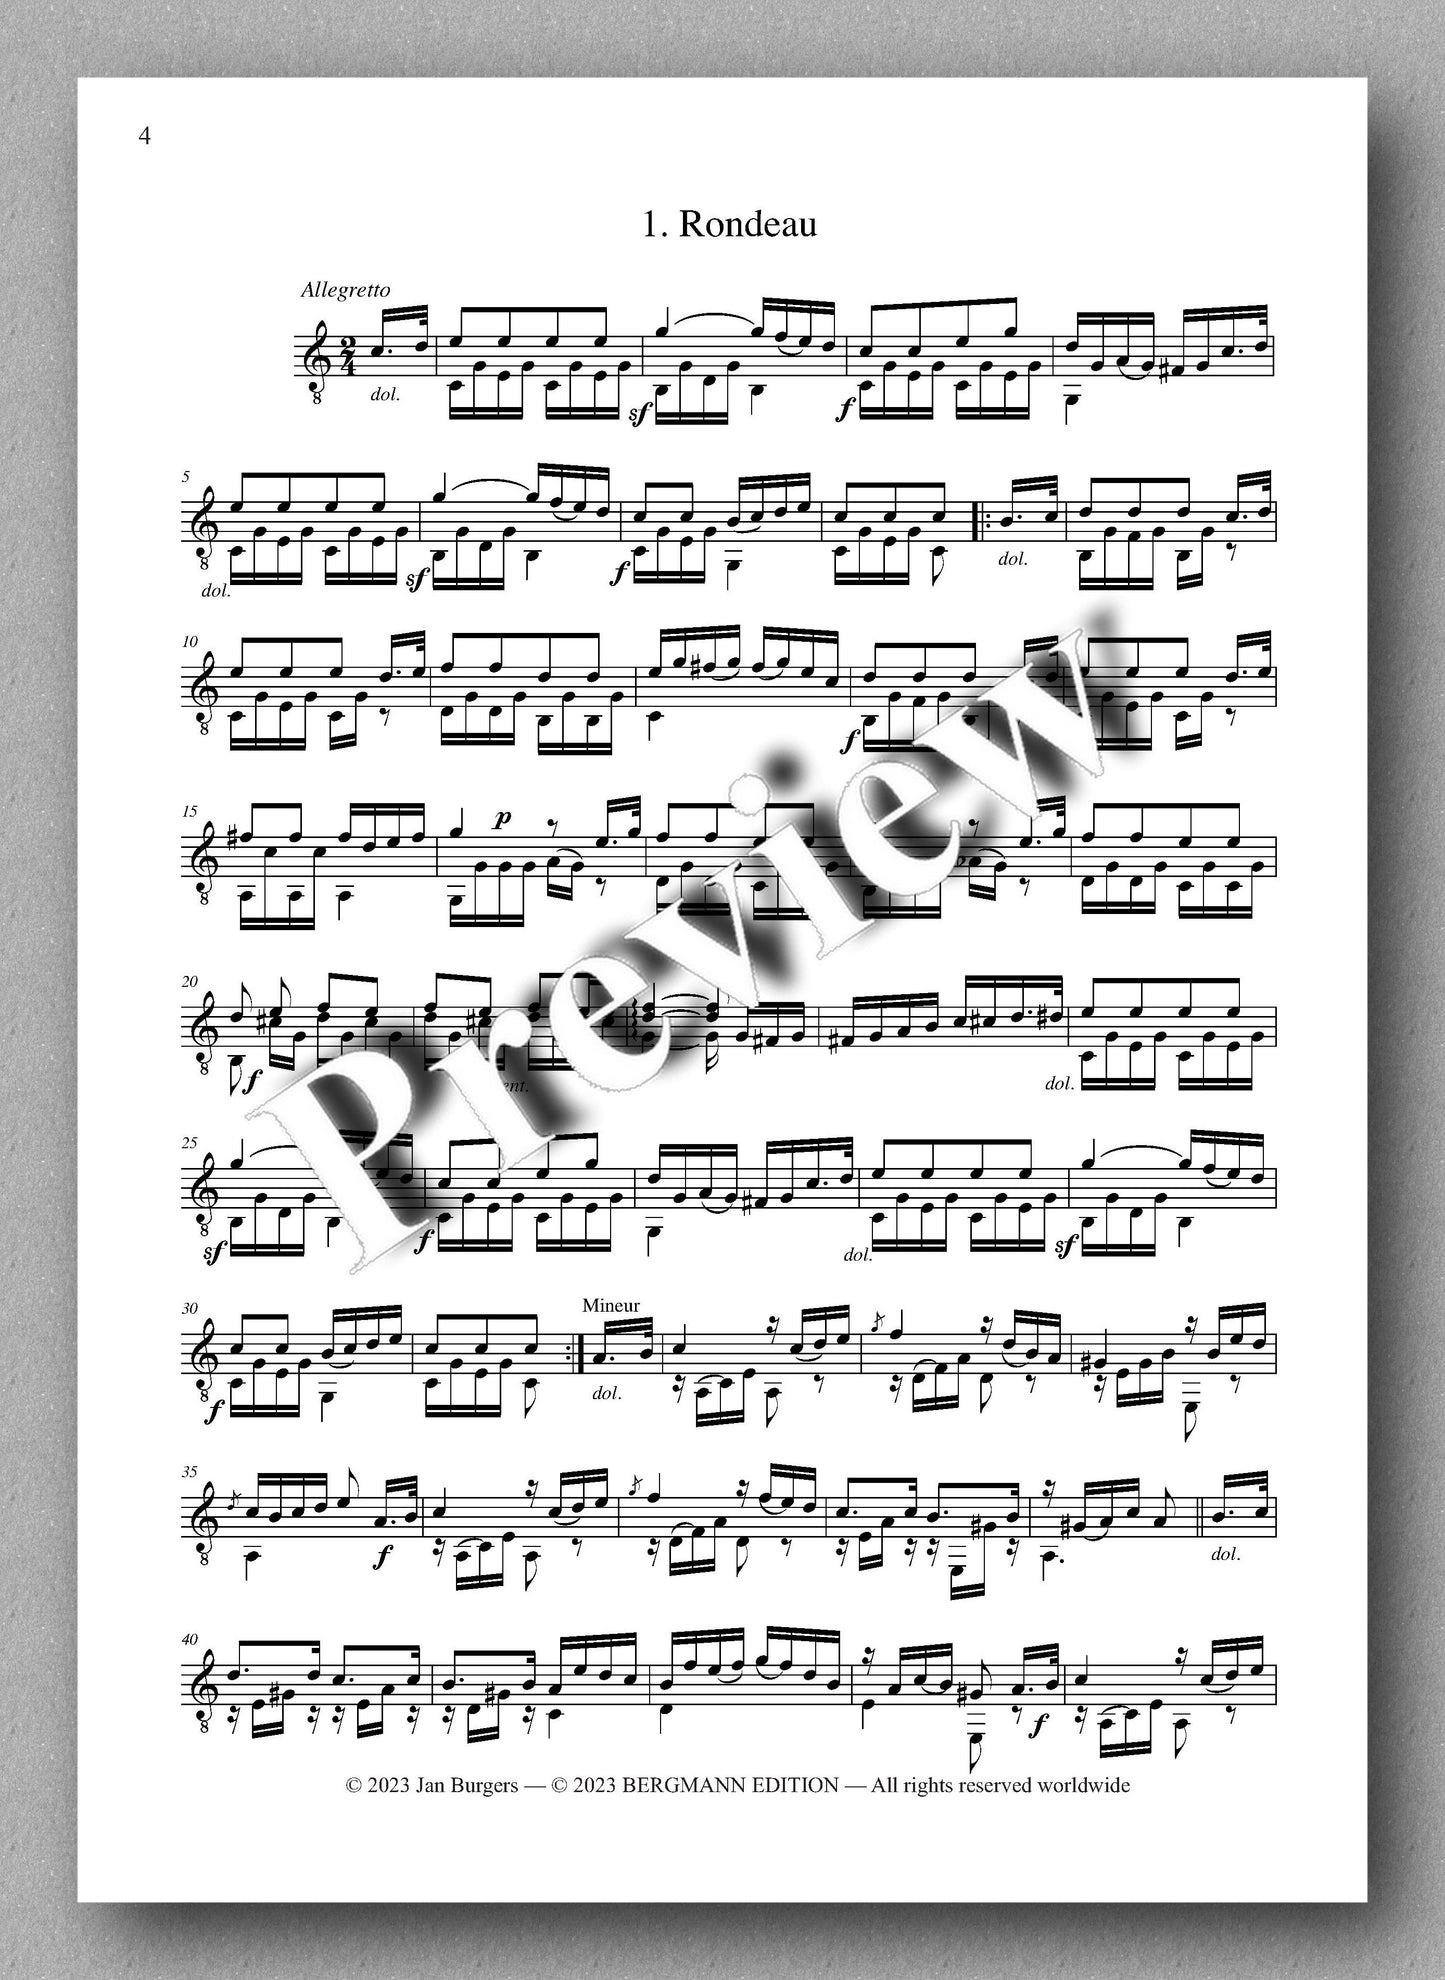 Copy of Molino, Collected Works for Guitar Solo, Vol. 26 - preview of the music score 1